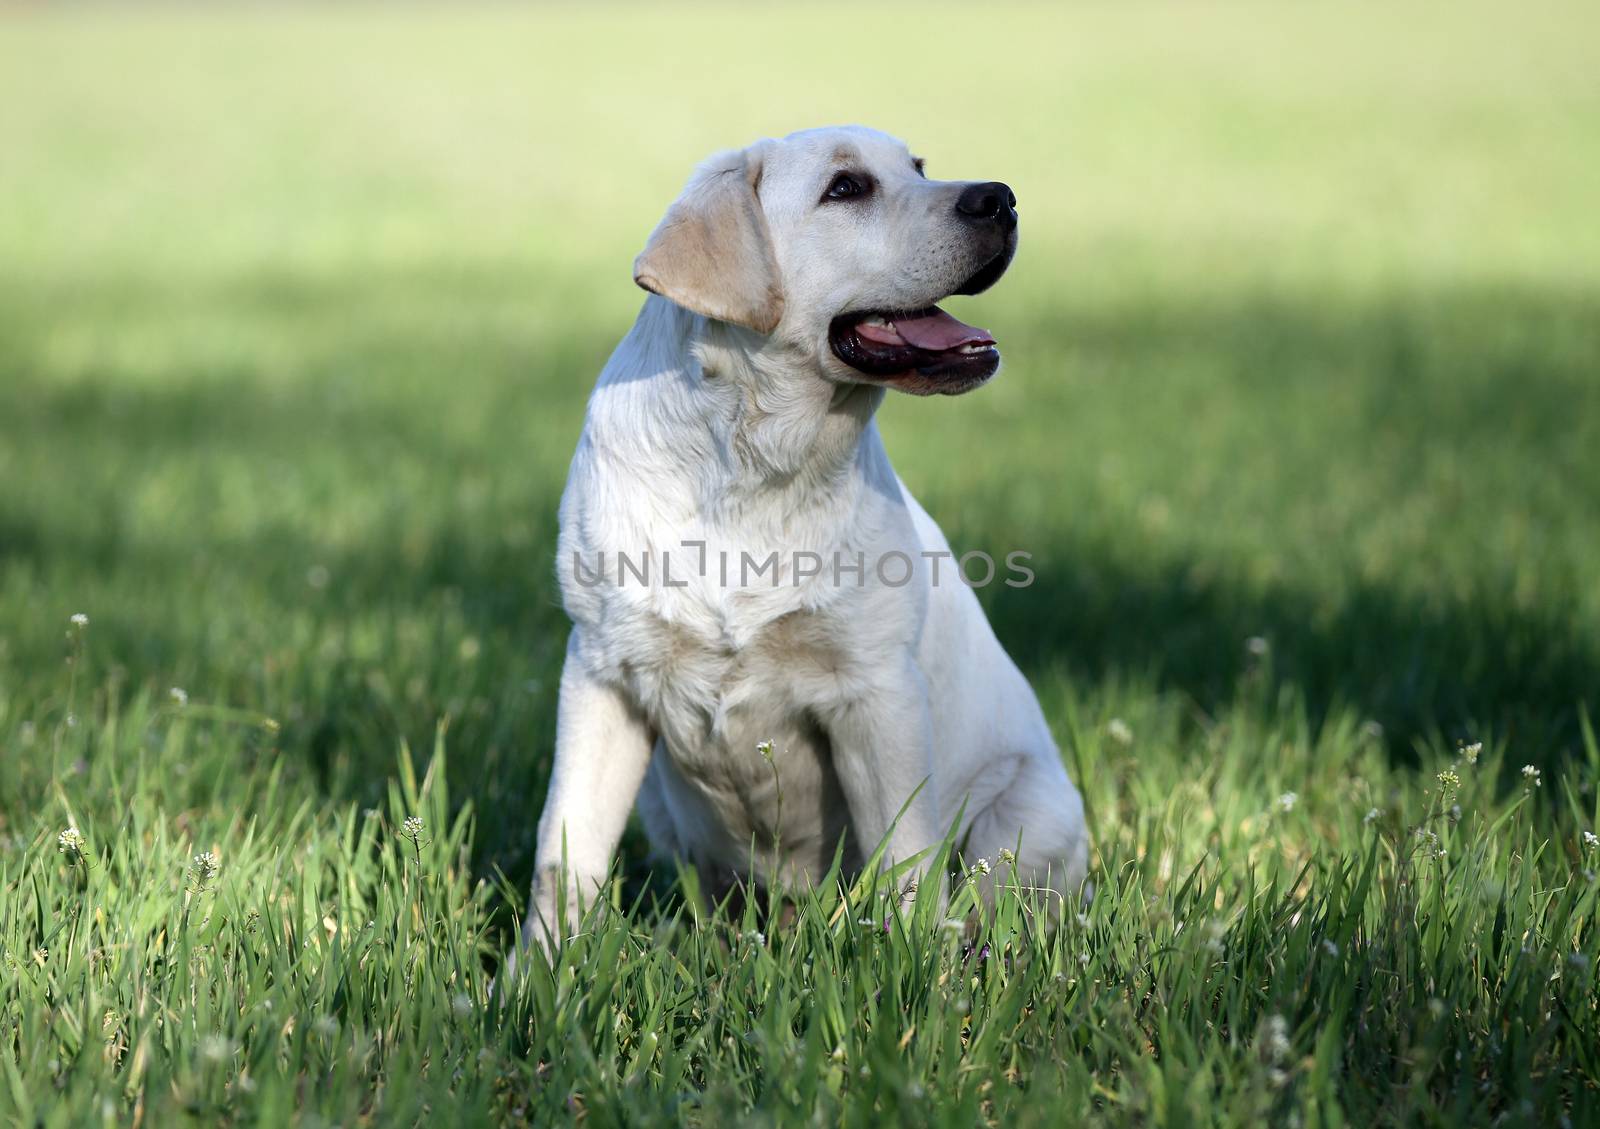 a yellow labrador in the park by Yarvet